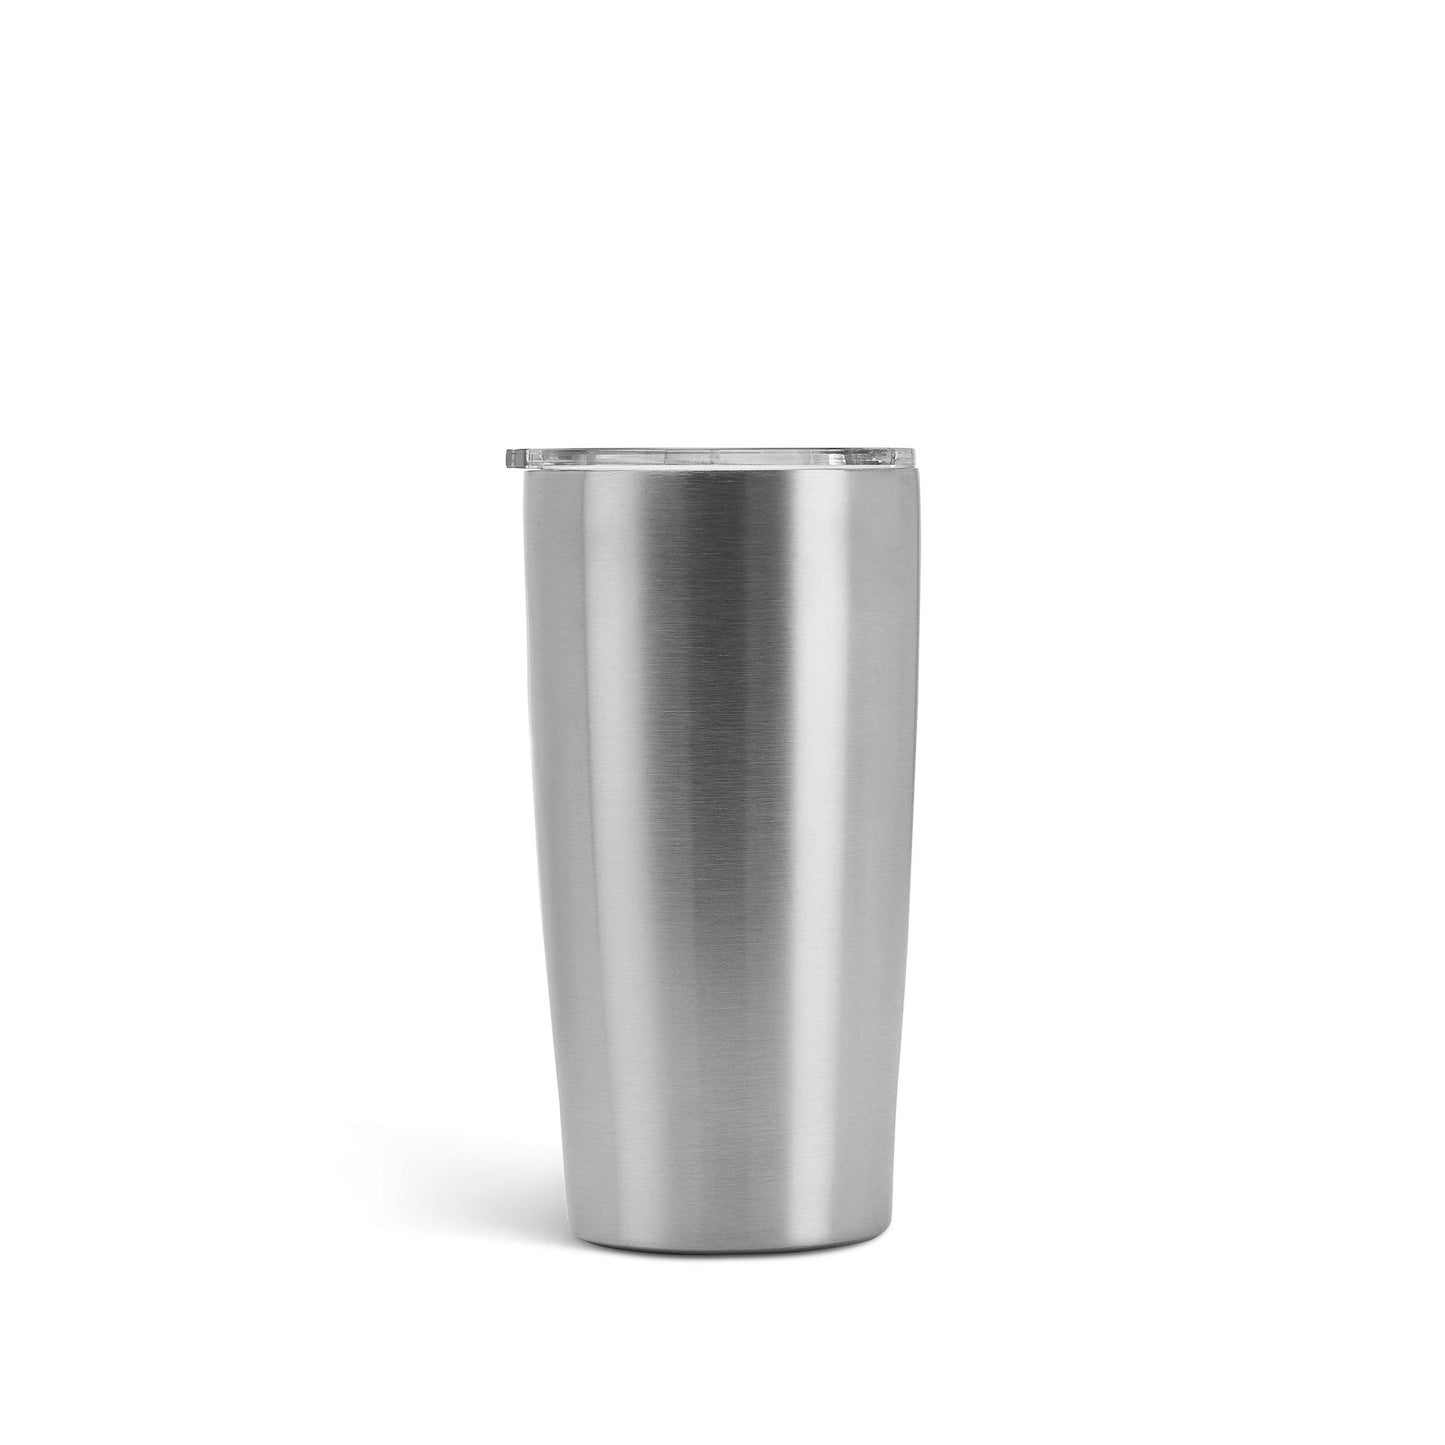 MakerFlo 20 oz Rimless Stainless Steel Insulated Tumbler, Silver, 1 PC